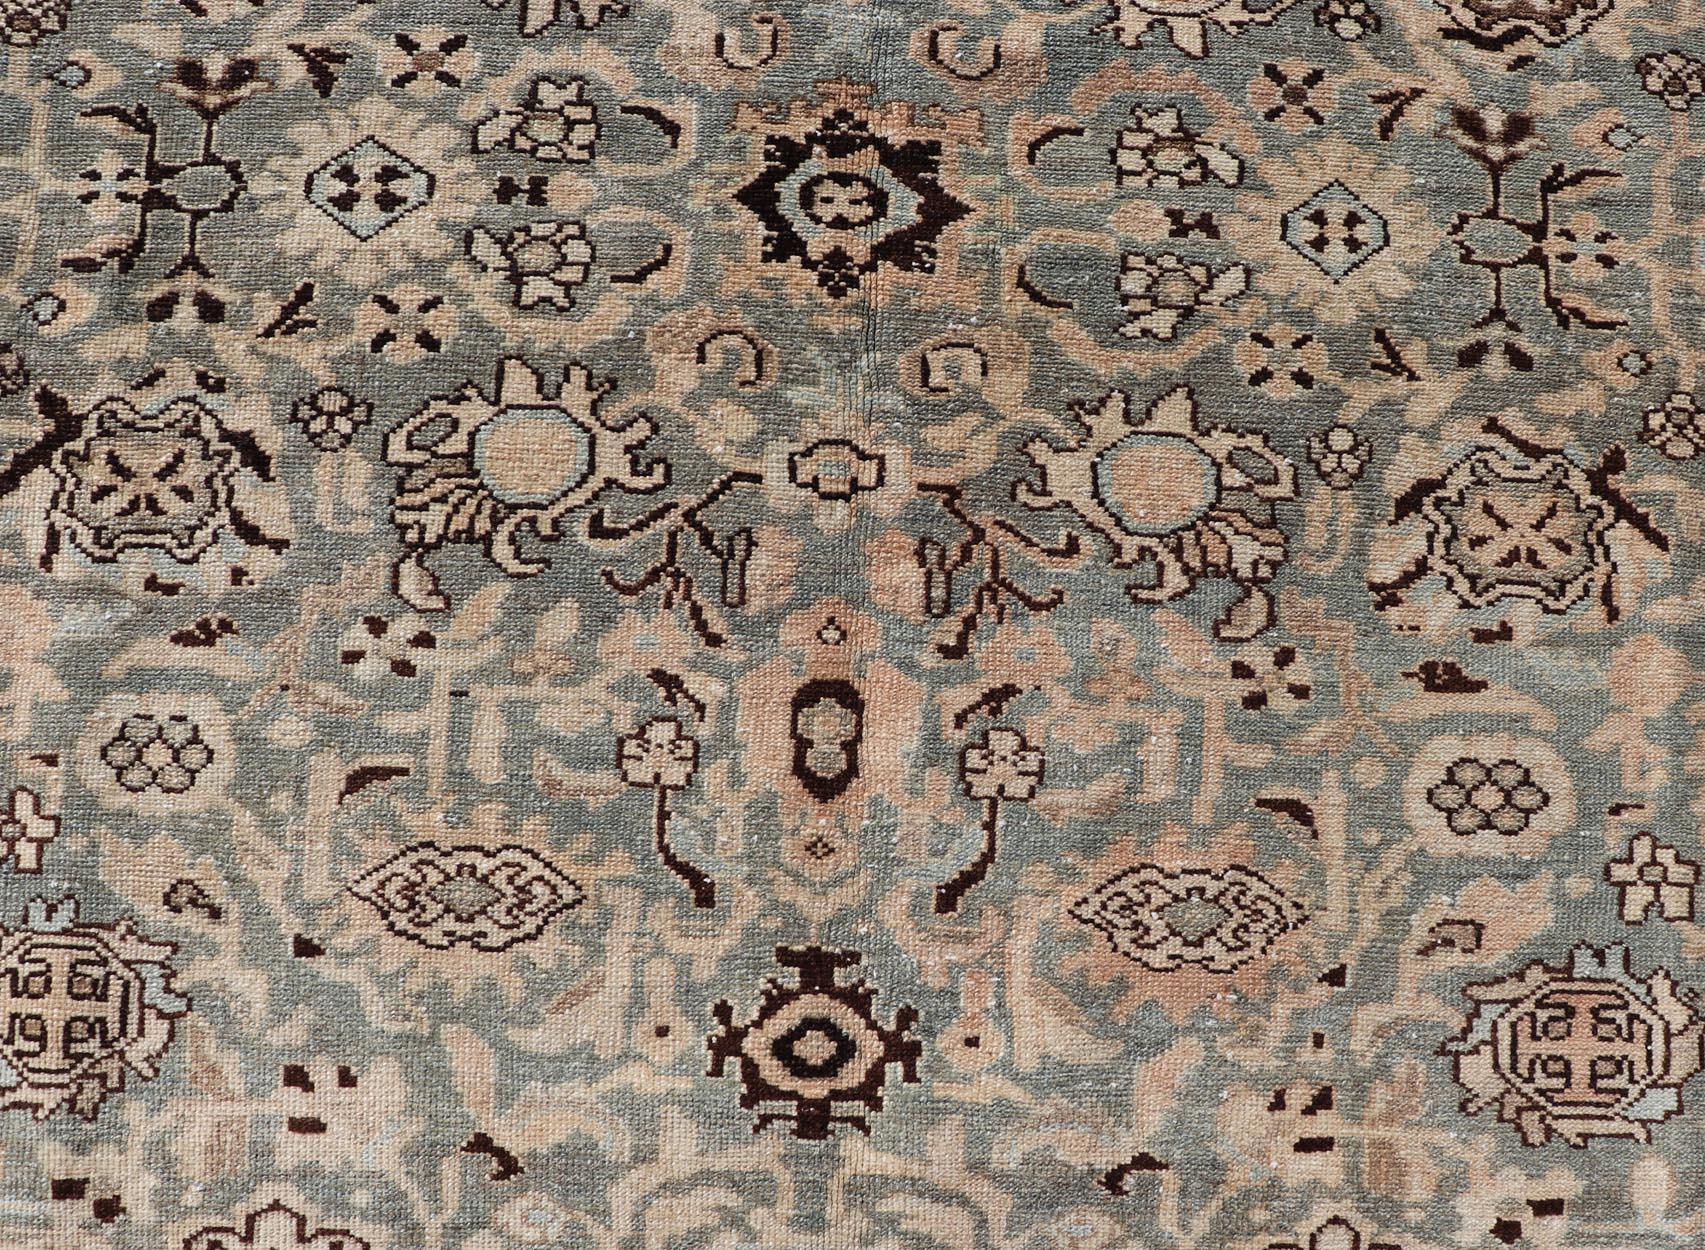 Hand-Knotted All-Over Floral Antique Persian Hamadan Rug in Gray Green, Peach & Earth Tones For Sale